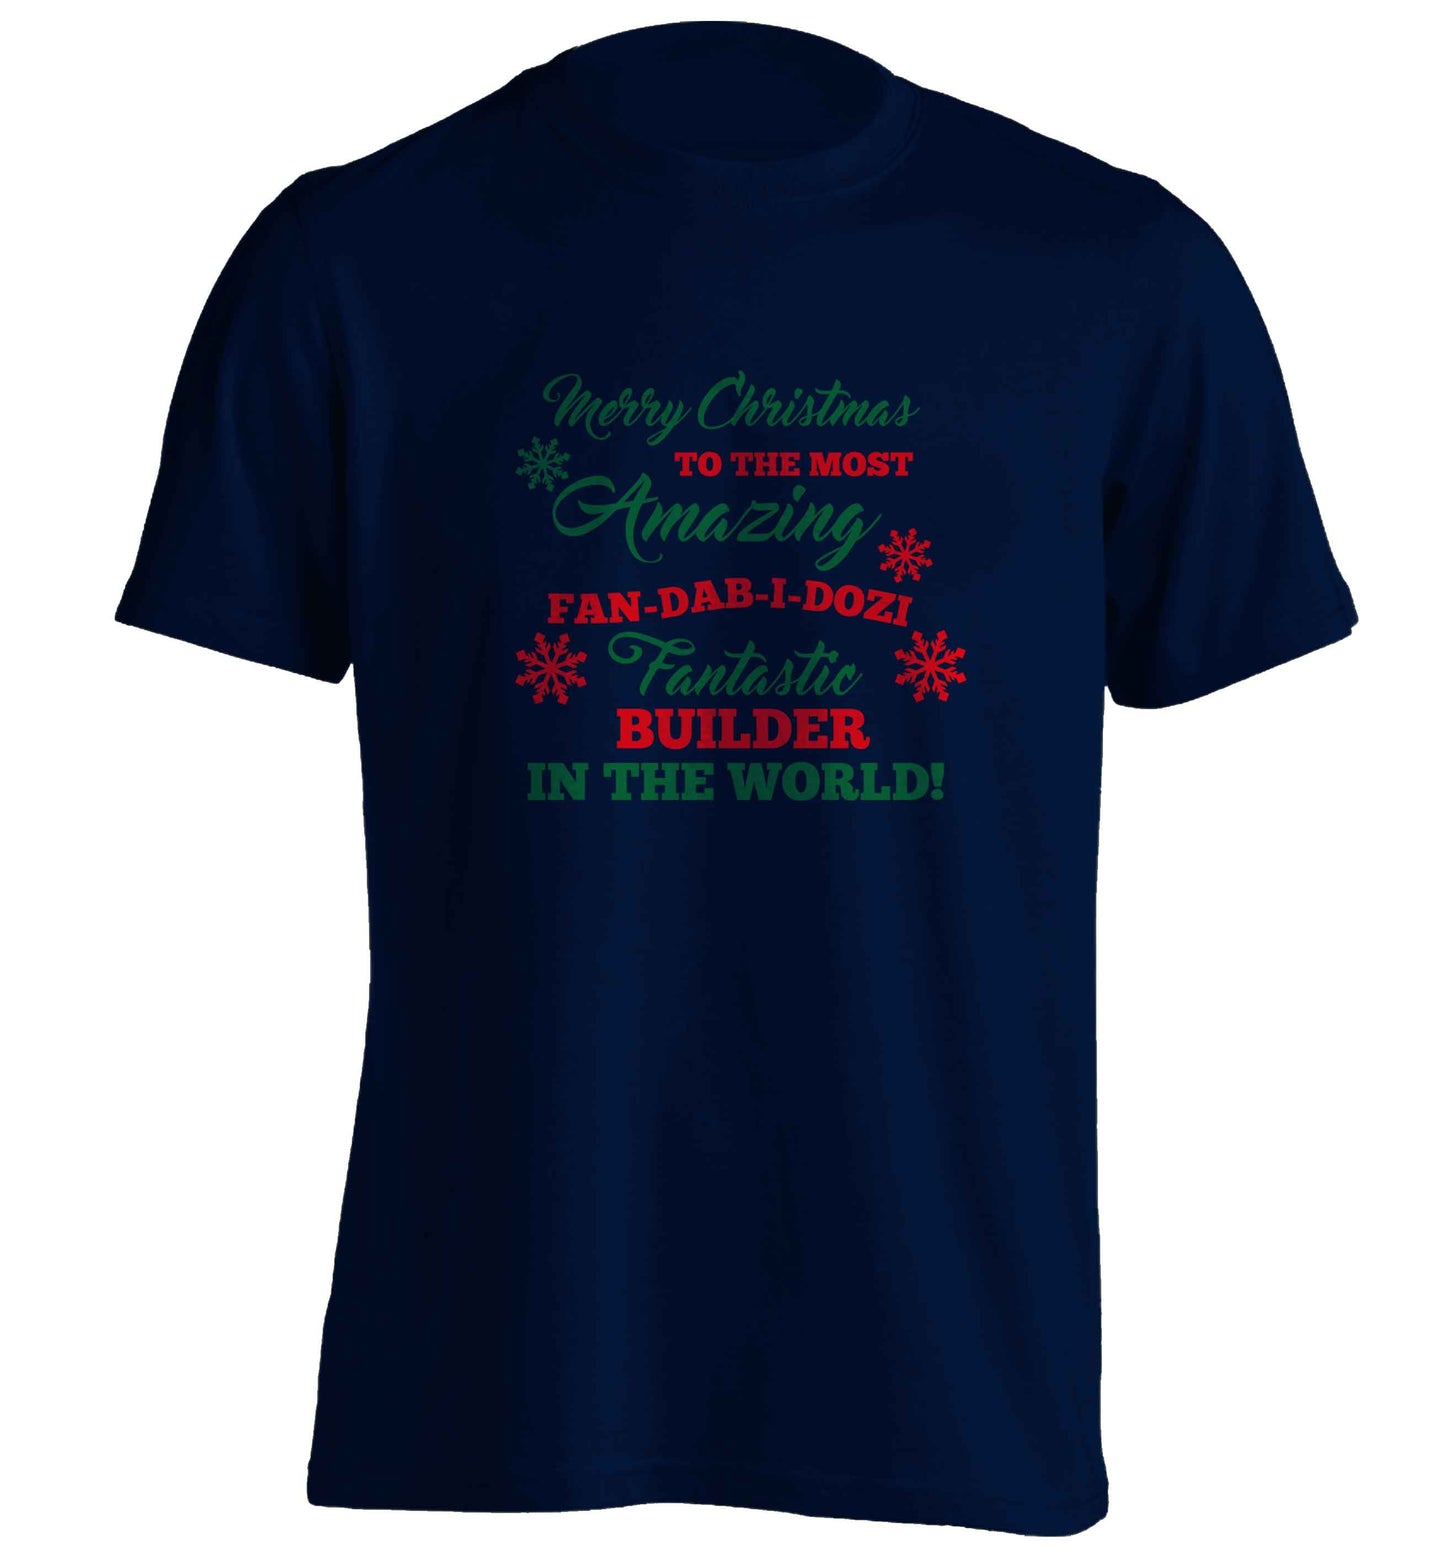 Merry Christmas to the most amazing builder in the world! adults unisex navy Tshirt 2XL